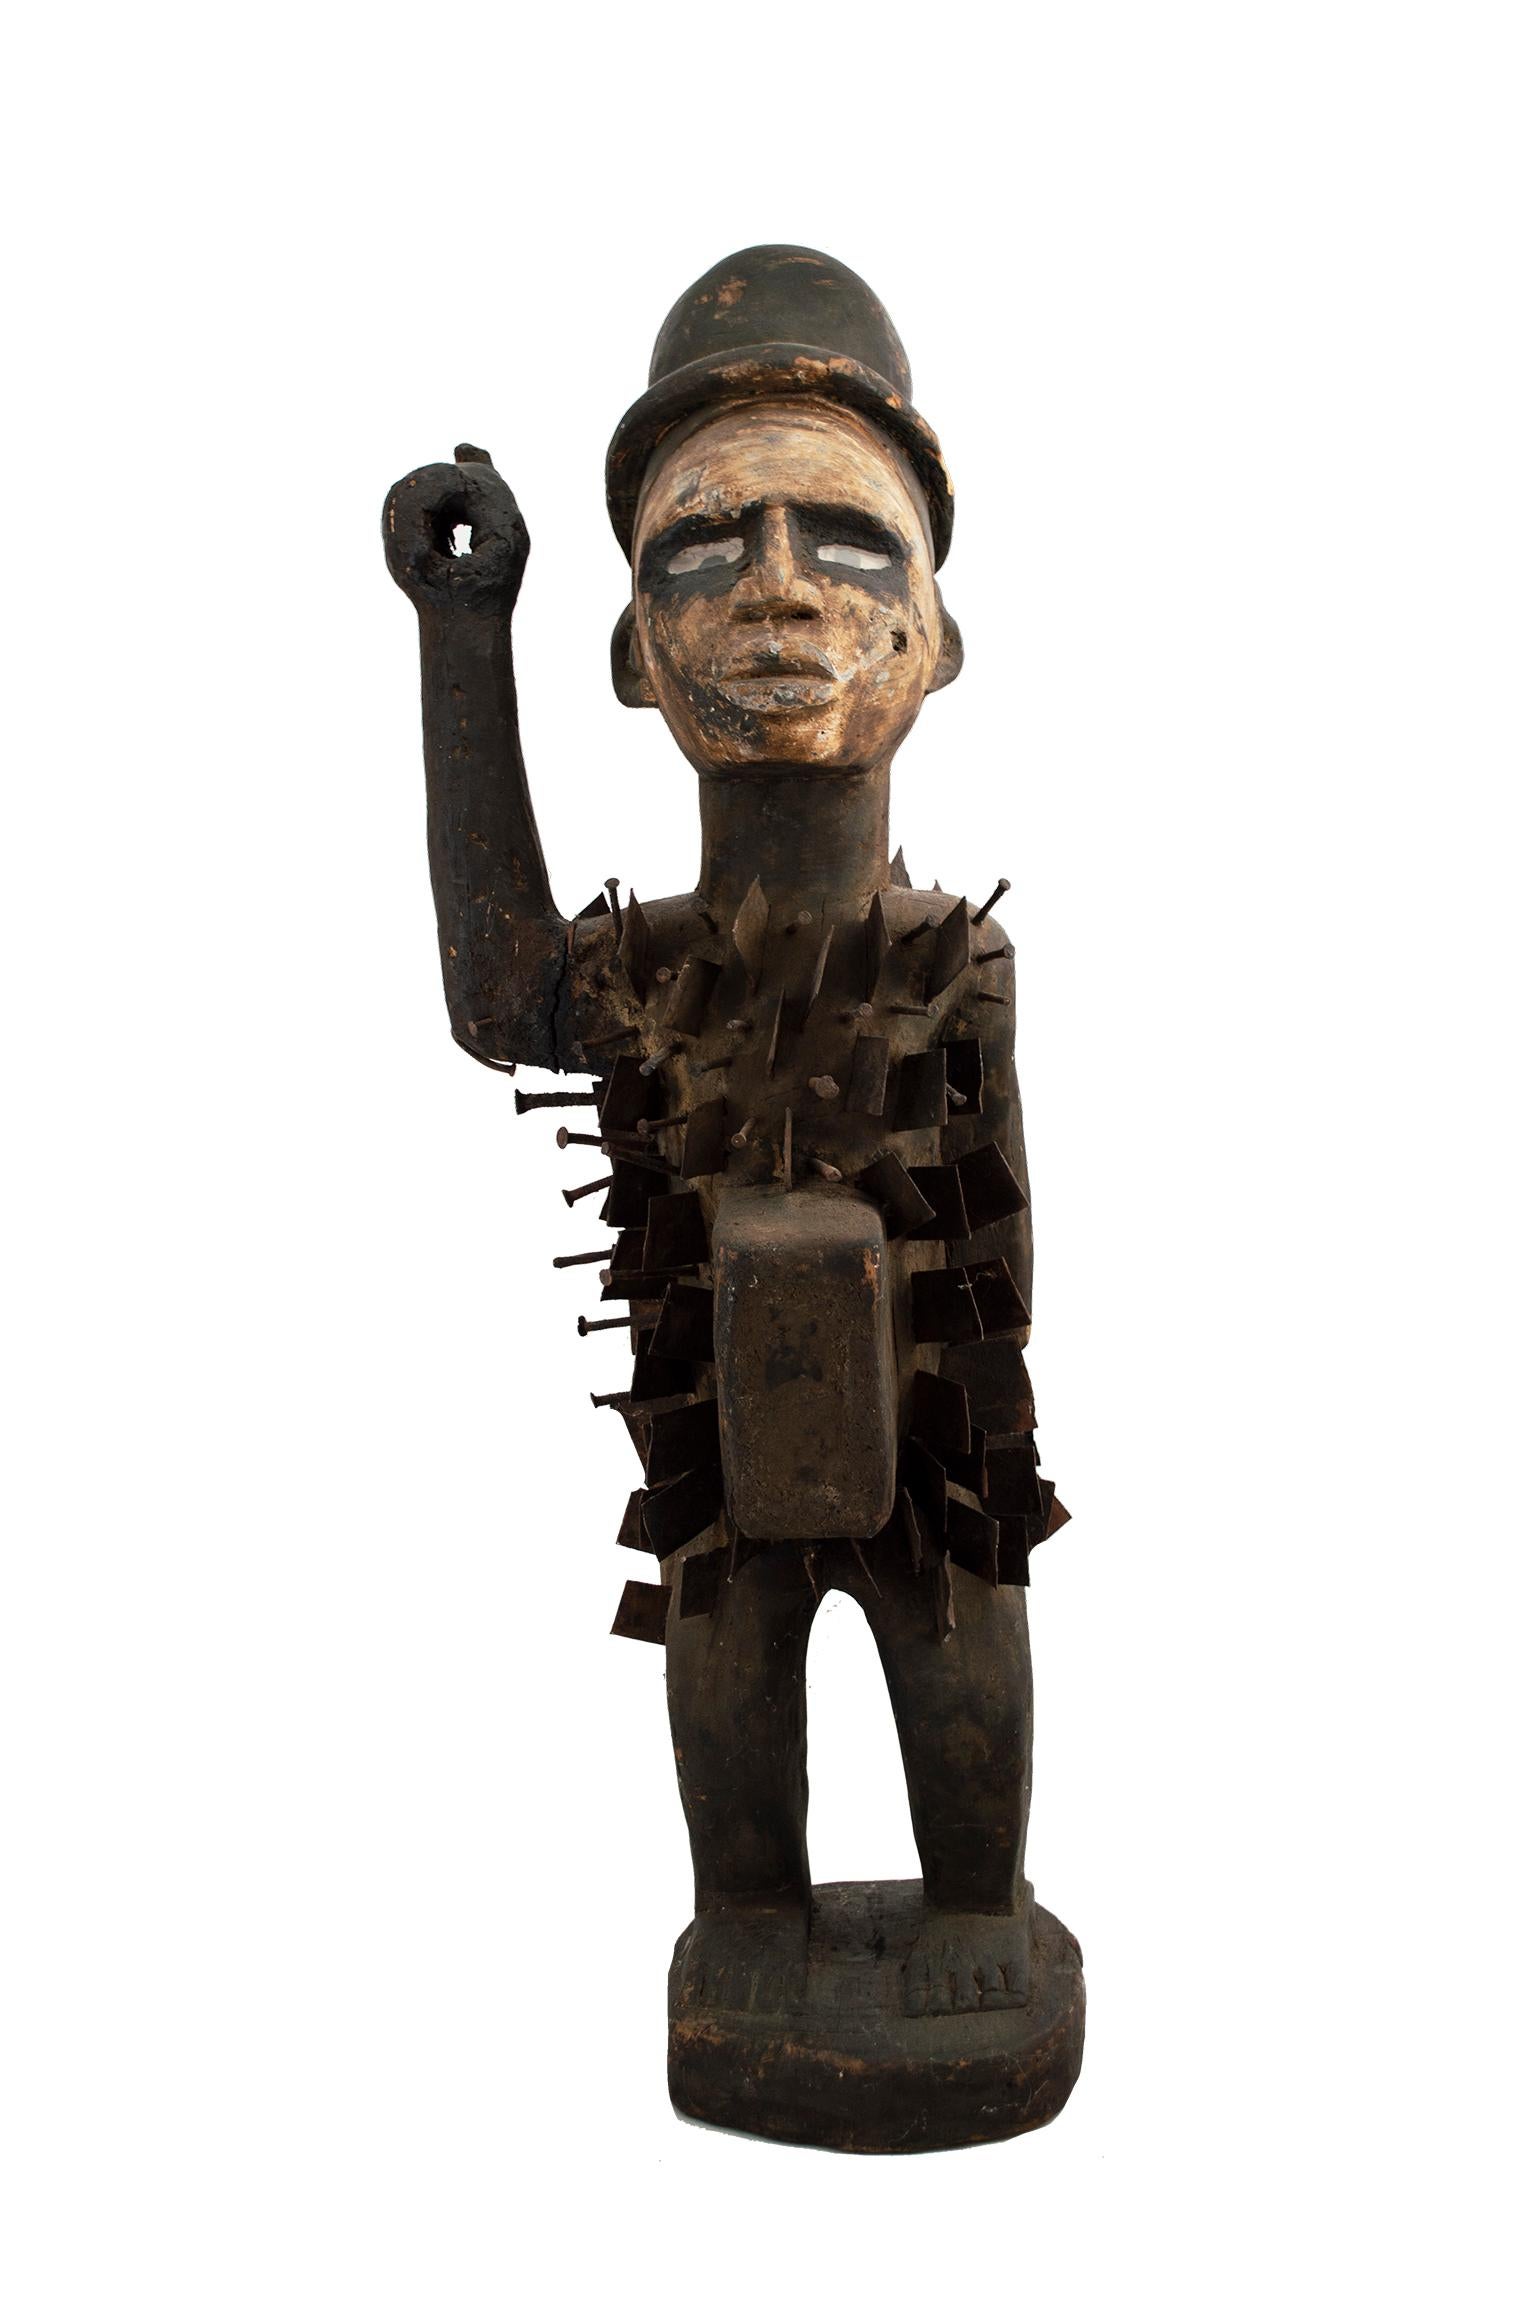 Unknown Figurative Sculpture - "Nail Fetish Bacongo-Zaire, " Glass, Wood, & Metal created circa 1910